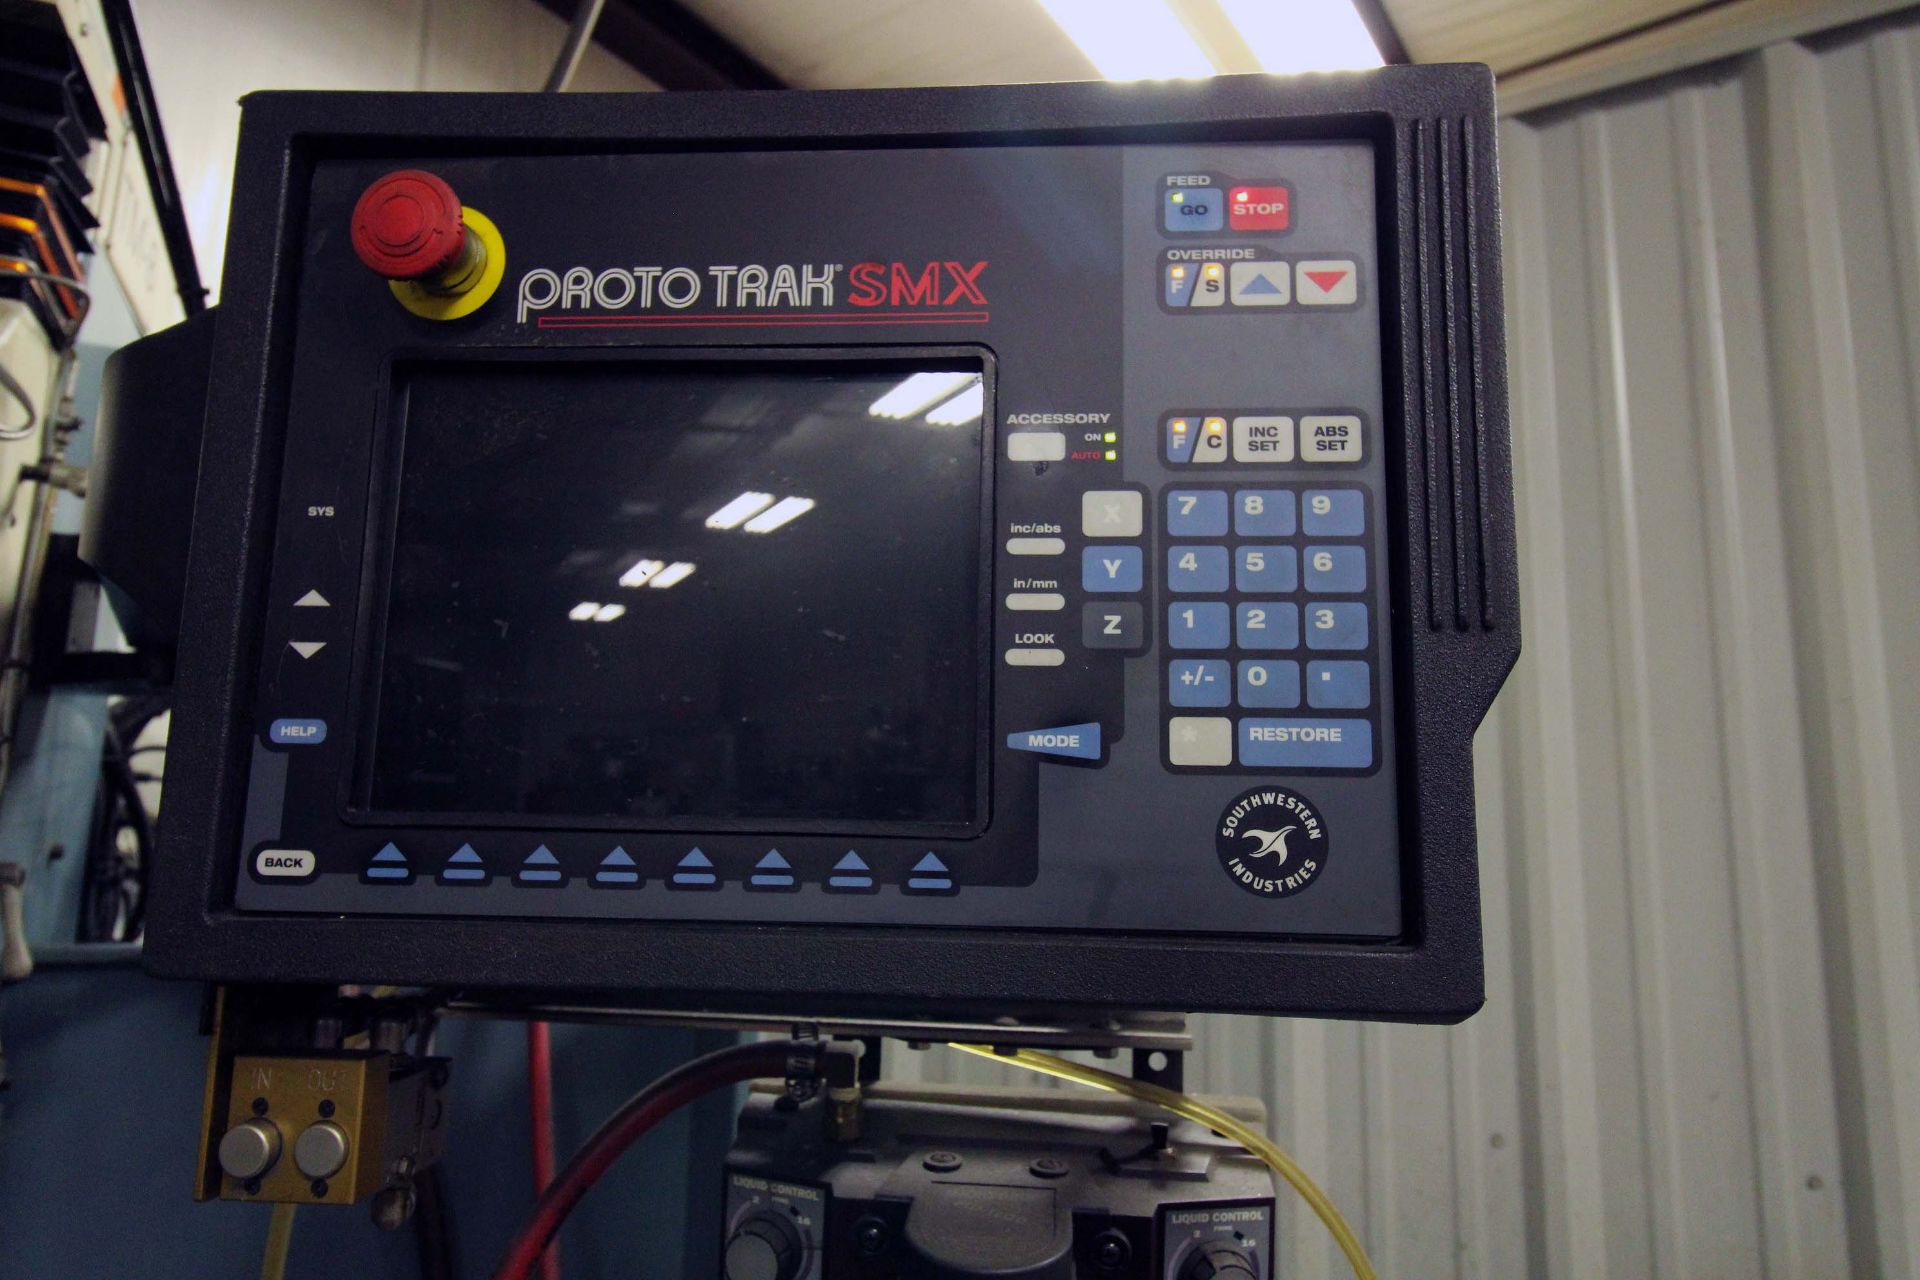 CNC BED TYPE VERTICAL TURRET MILL, TRAK MDL. DPMSX5P, Prototrak SMX CNC control, 50” x 12” table, - Image 7 of 11